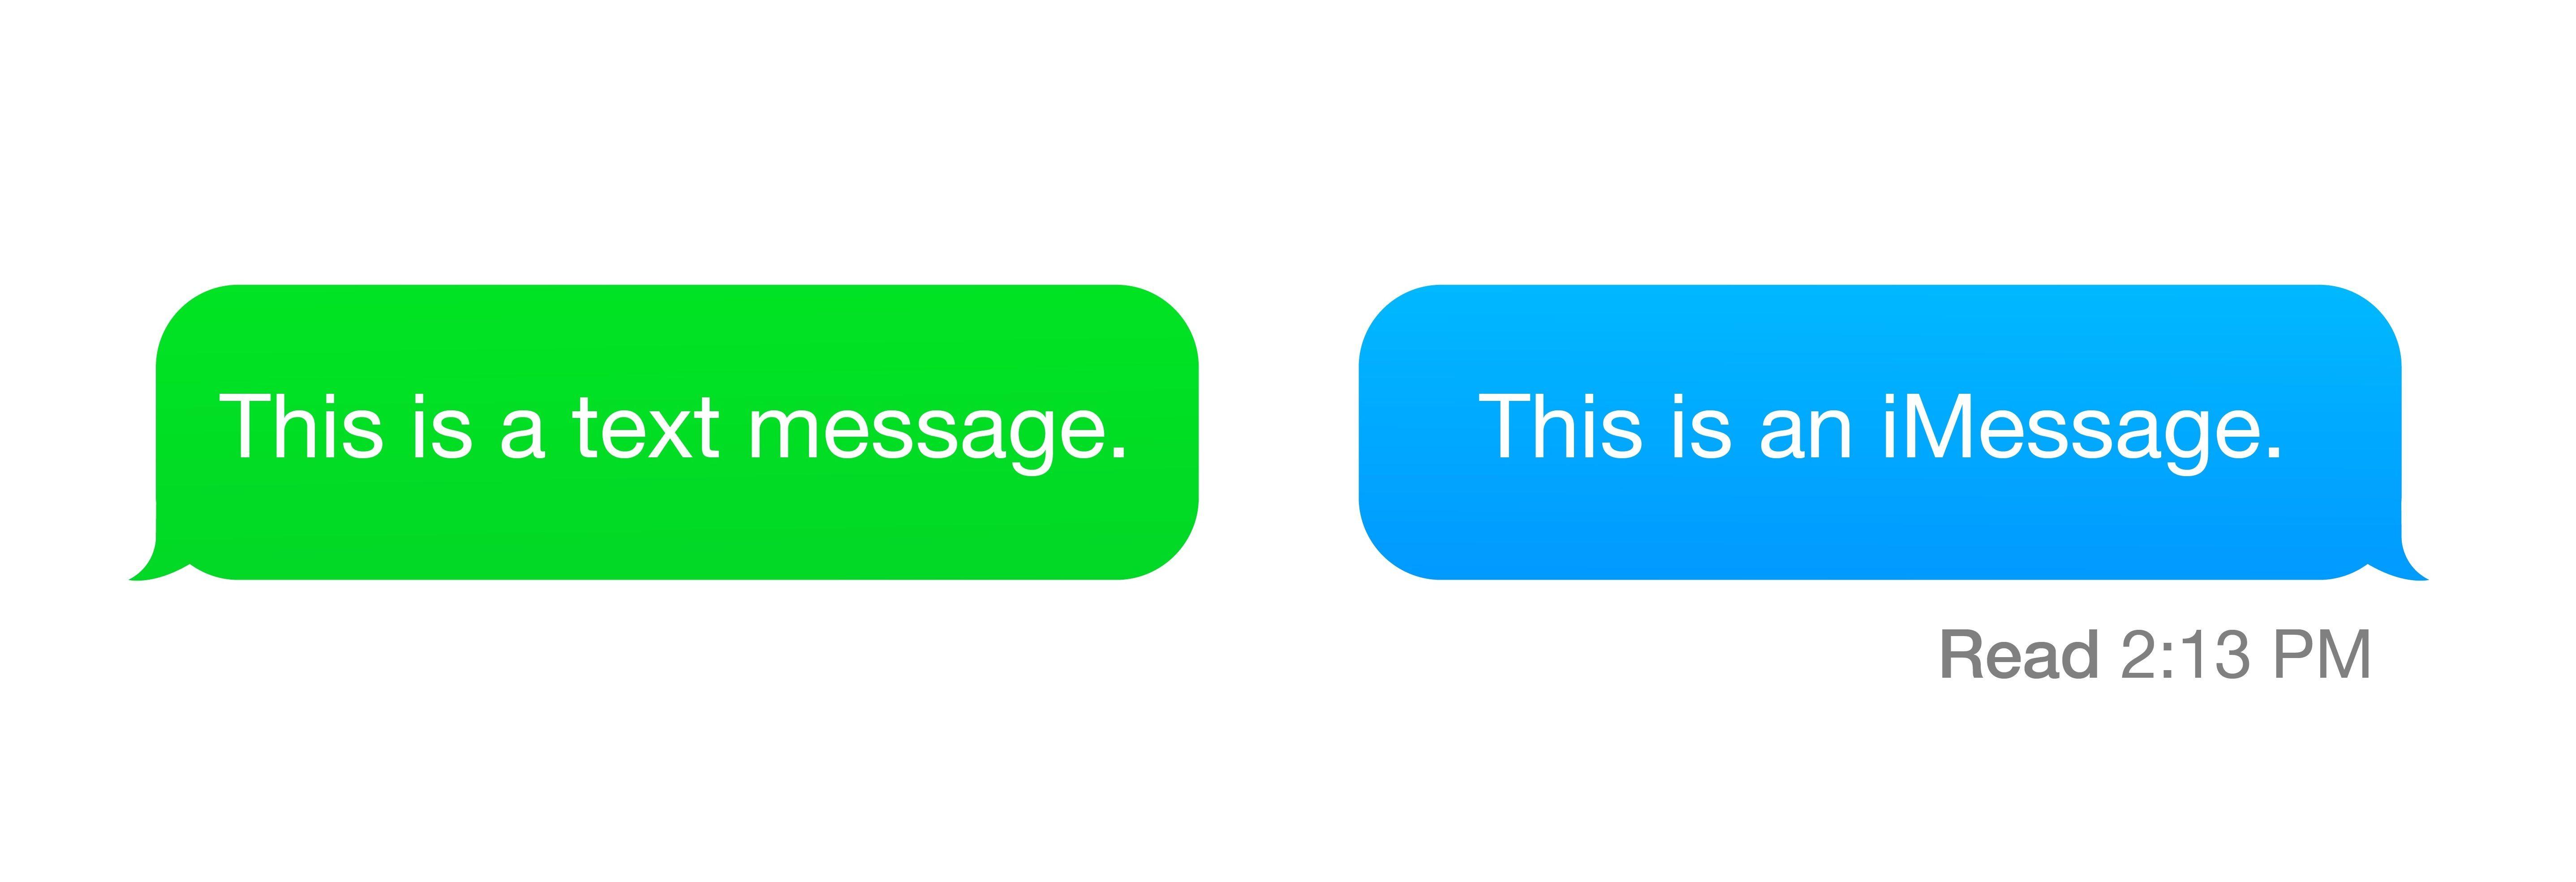 Green Message Bubble Logo - Ugh, Green Bubbles! Apple's iMessage Makes Switching to Android Hard ...